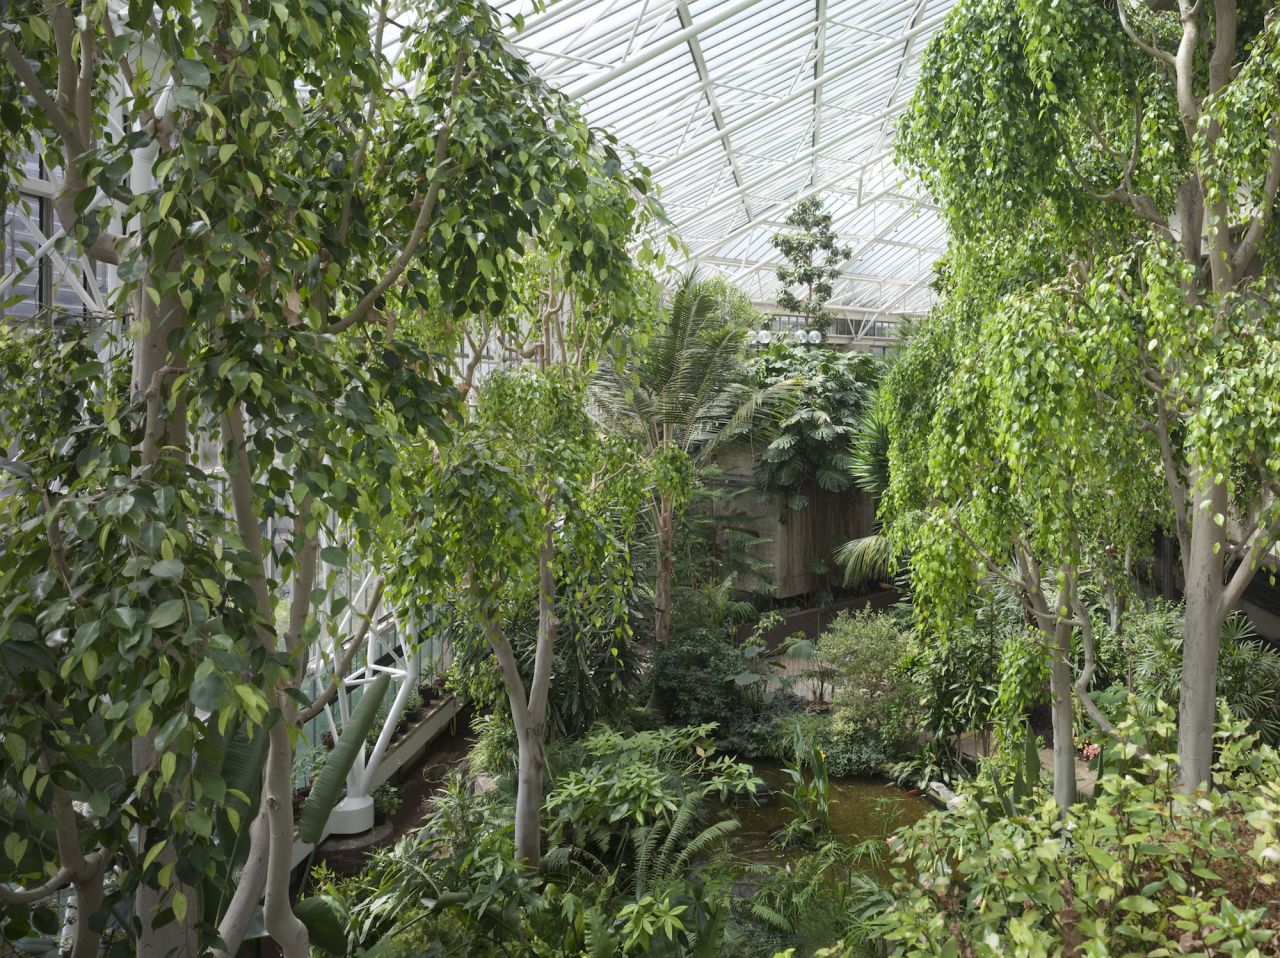 Split over two levels, this is the second largest glasshouse in London, after Kew Gardens, and is a sanctuary to more than 2,000 varieties of tropical plants.